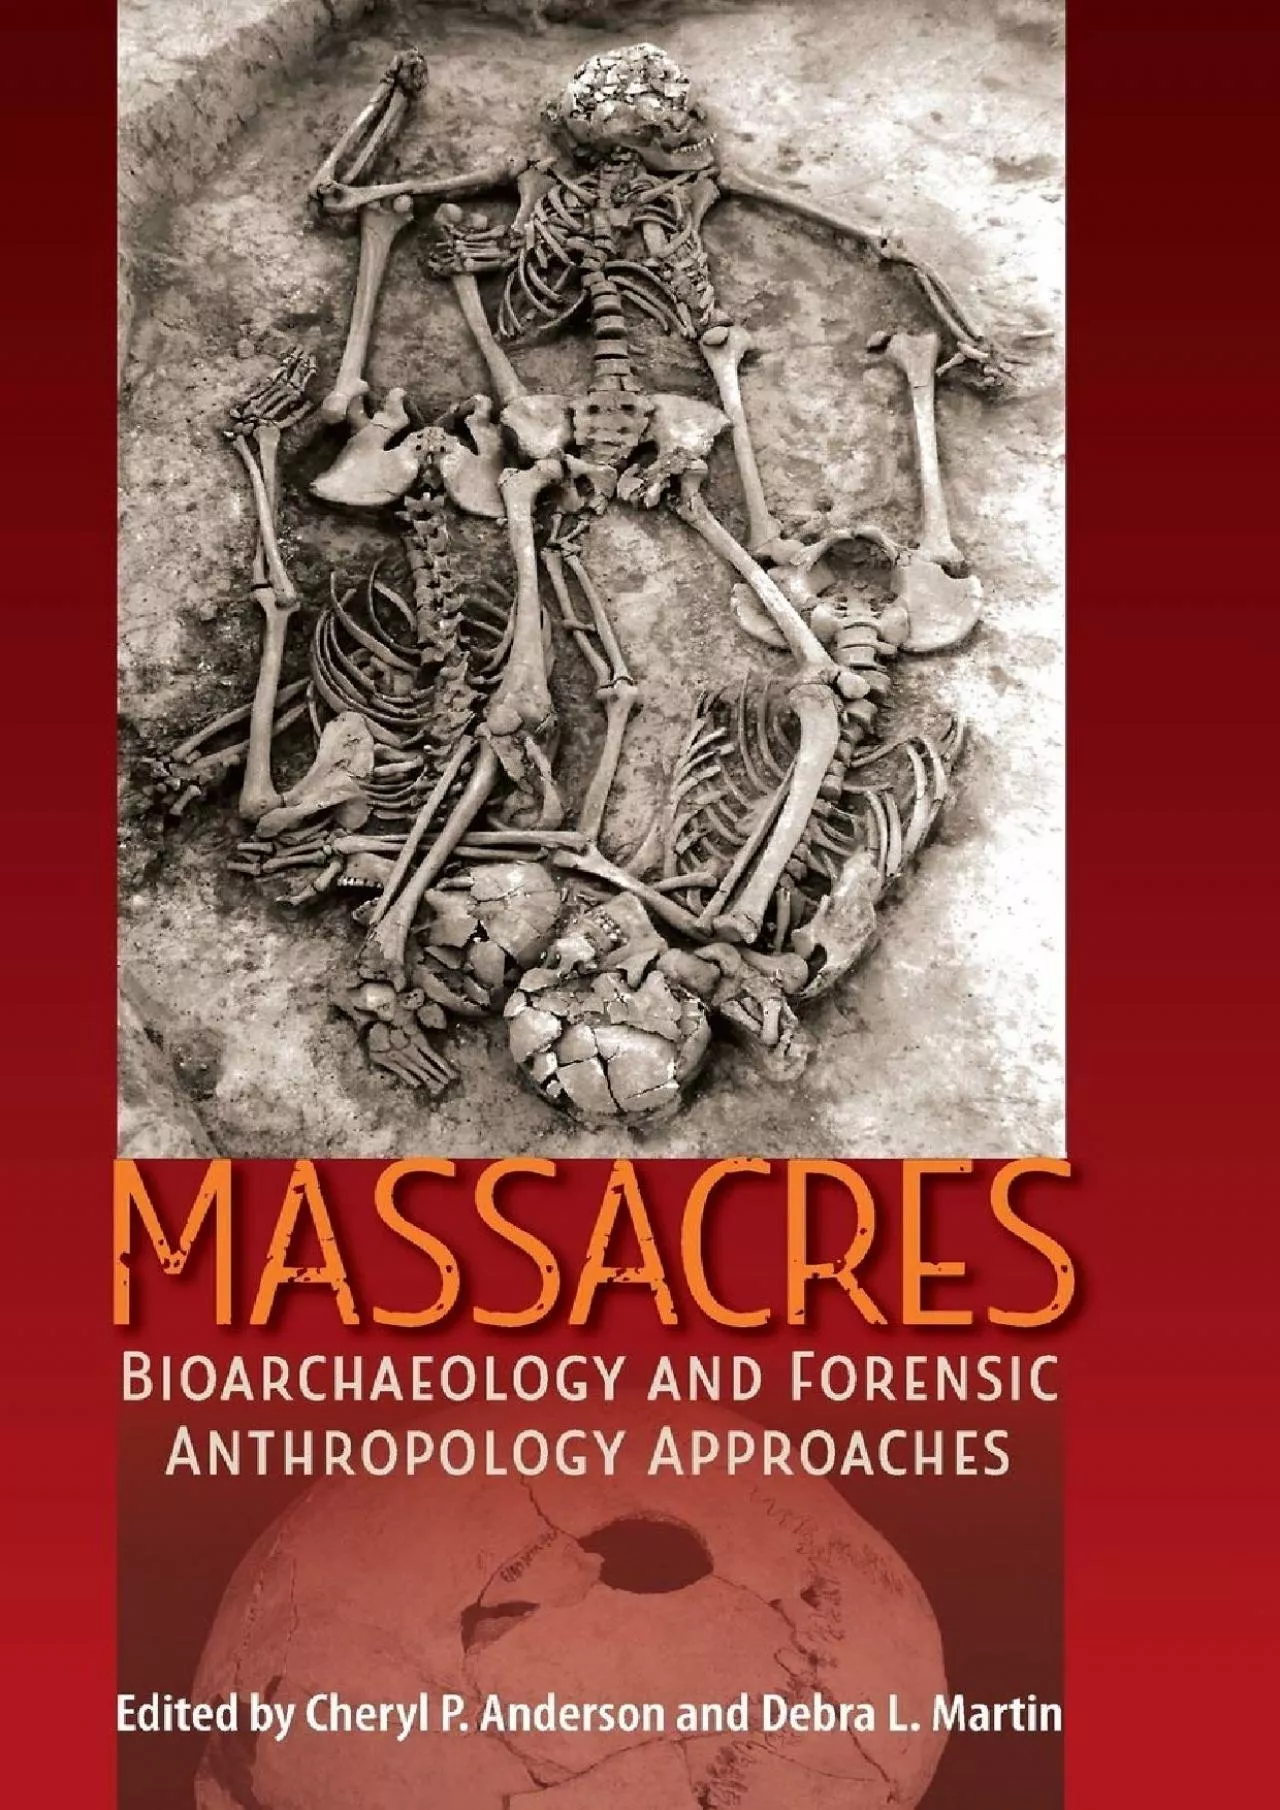 (DOWNLOAD)-Massacres: Bioarchaeology and Forensic Anthropology Approaches (Bioarchaeological